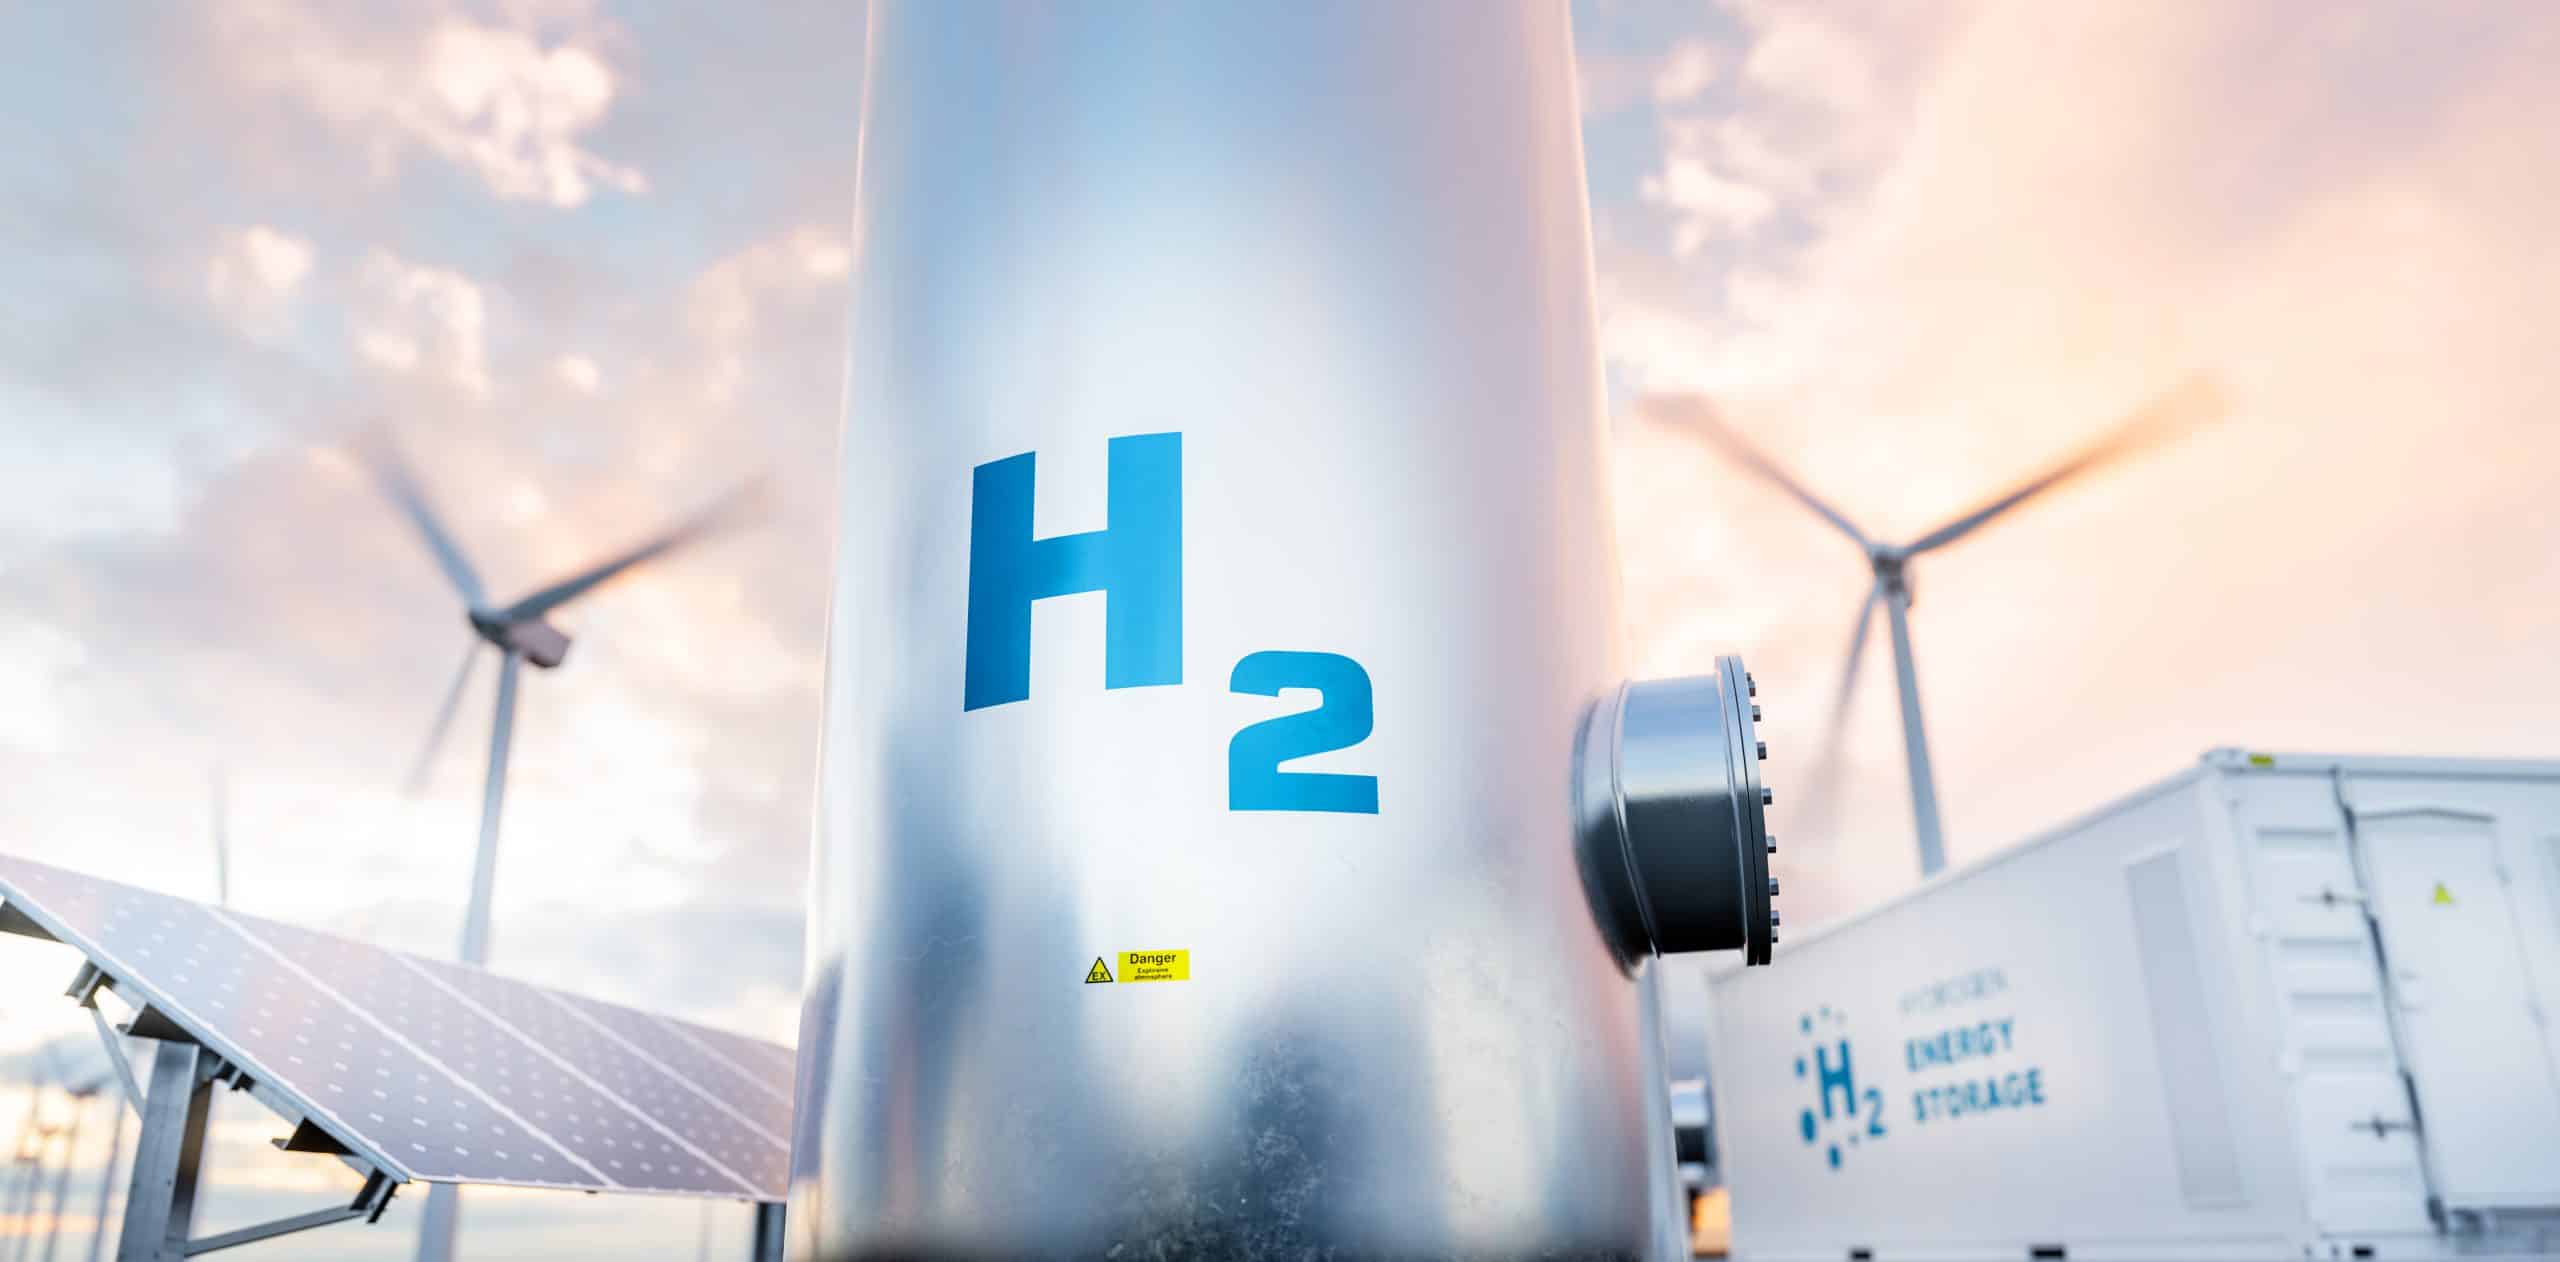 REUZE project: Engie, Infinium and ArcelorMittal are working together to produce e-fuel in Hauts-de-France.